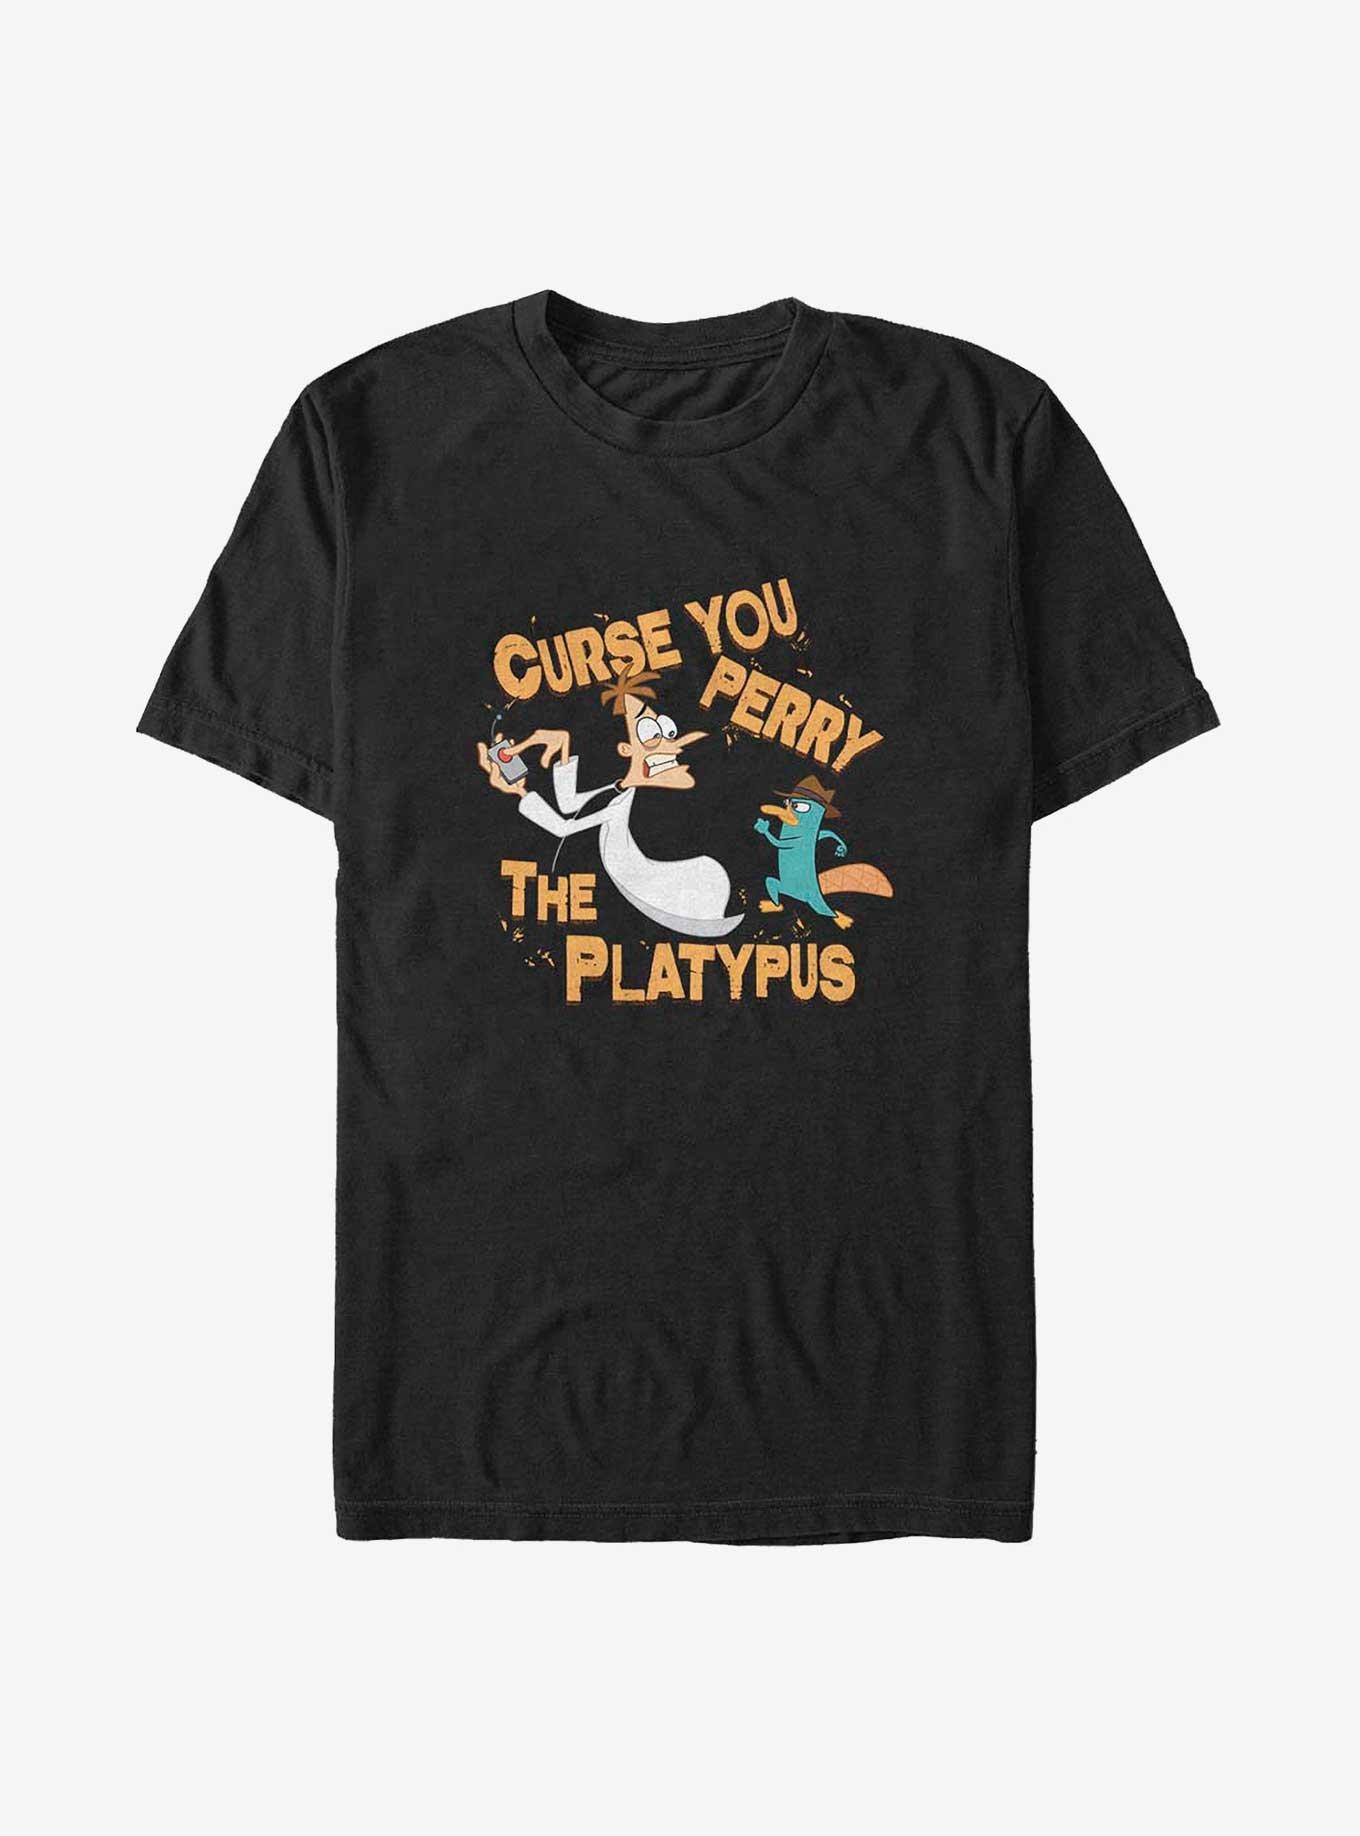 Disney Phineas and Ferb Curse You Perry The Platypus Big & Tall T-Shirt, BLACK, hi-res